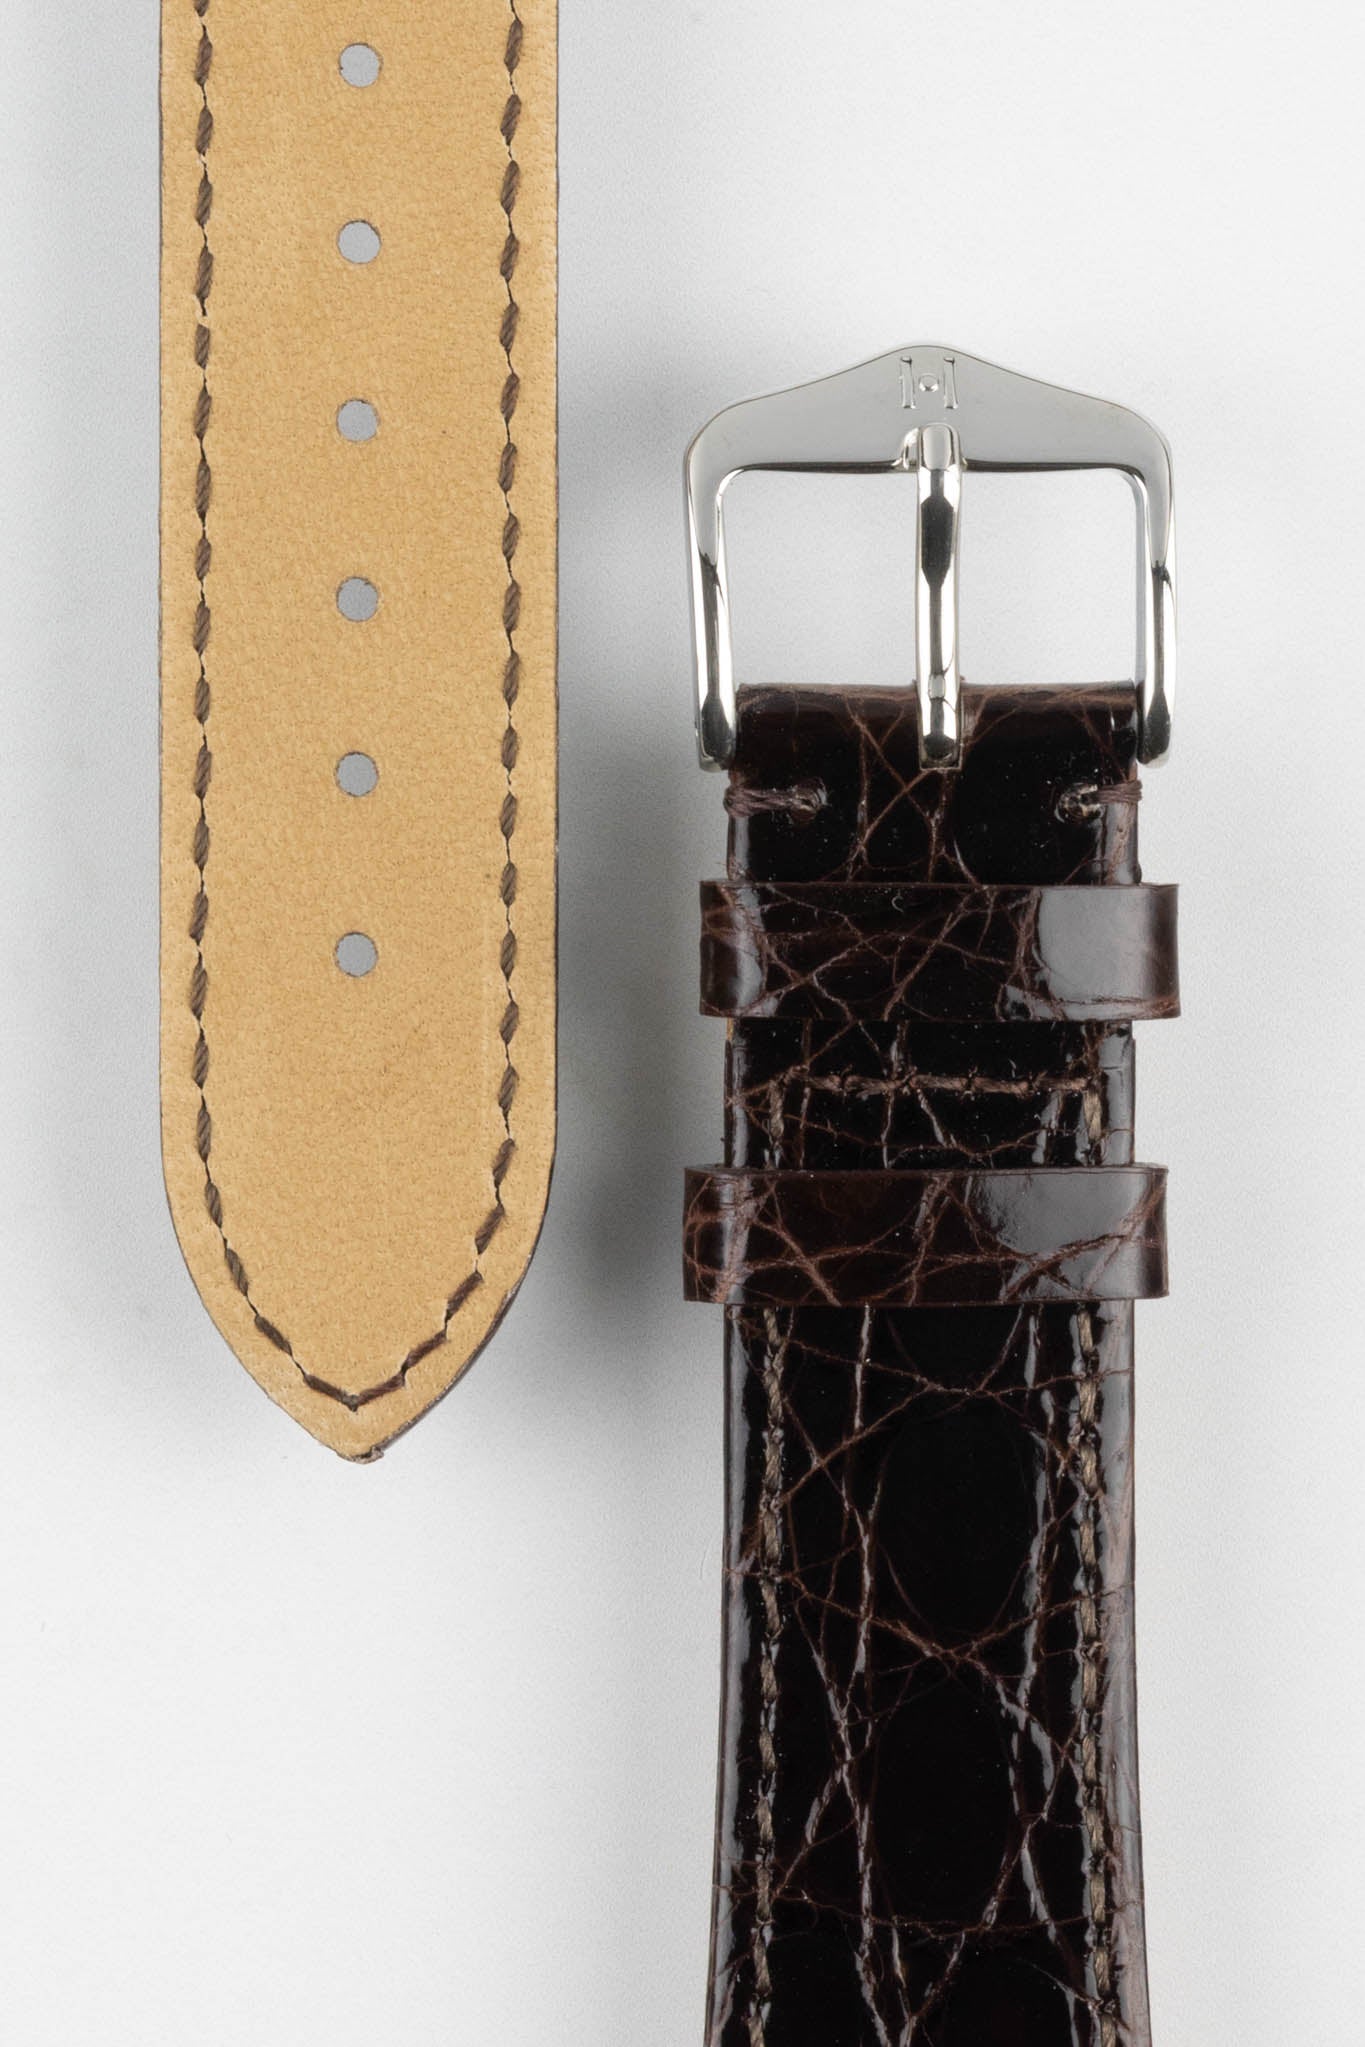 Hirsch GENUINE CROCO Open-Ended Crocodile Leather Watch Strap in BROWN